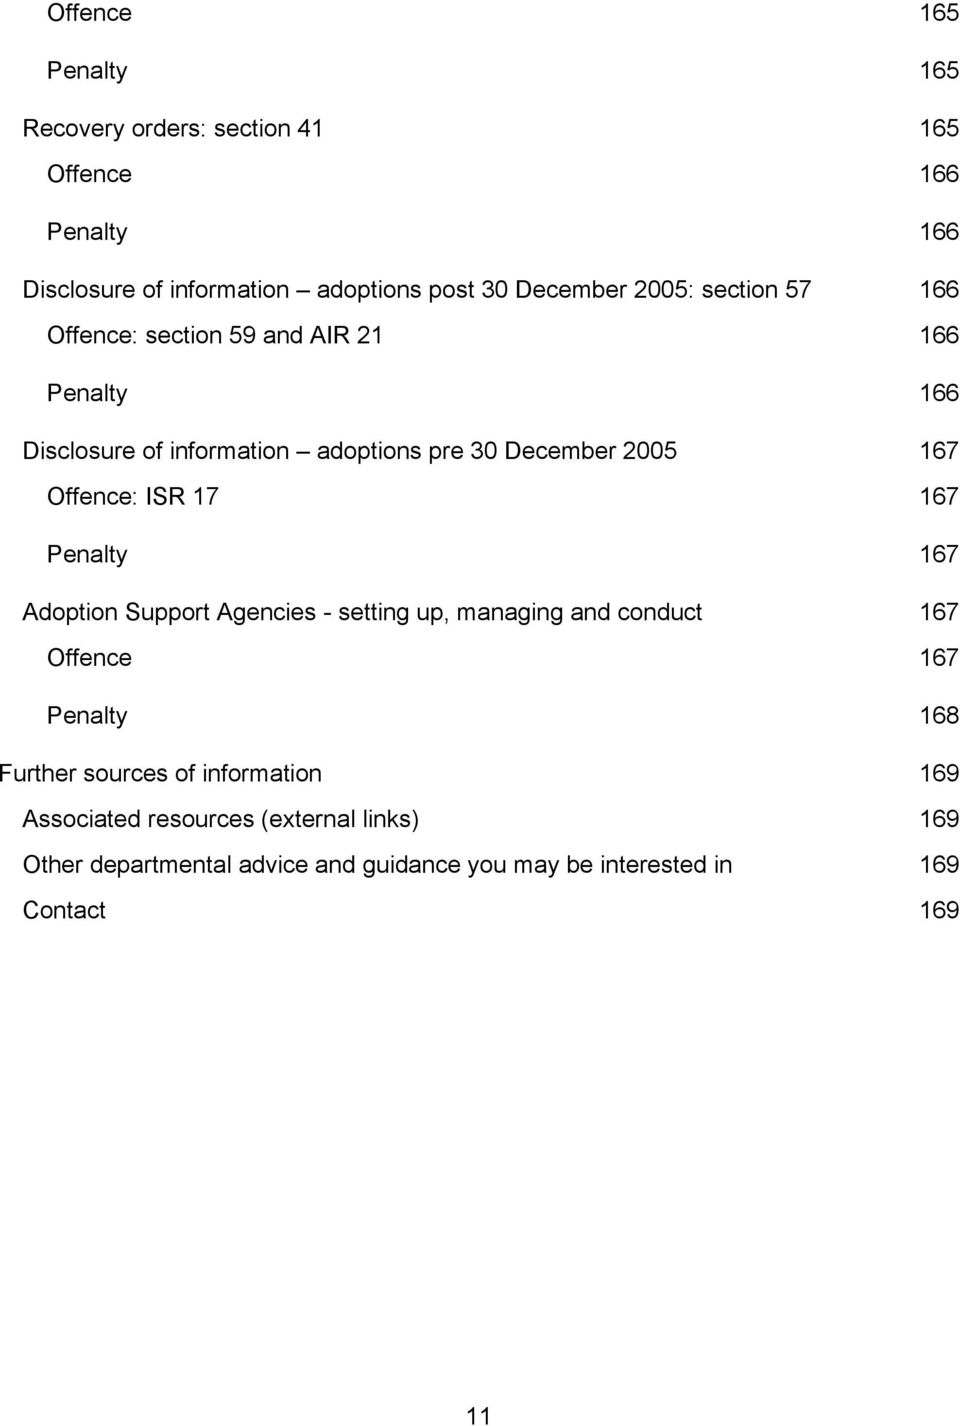 Offence: ISR 17 167 Penalty 167 Adoption Support Agencies - setting up, managing and conduct 167 Offence 167 Penalty 168 Further